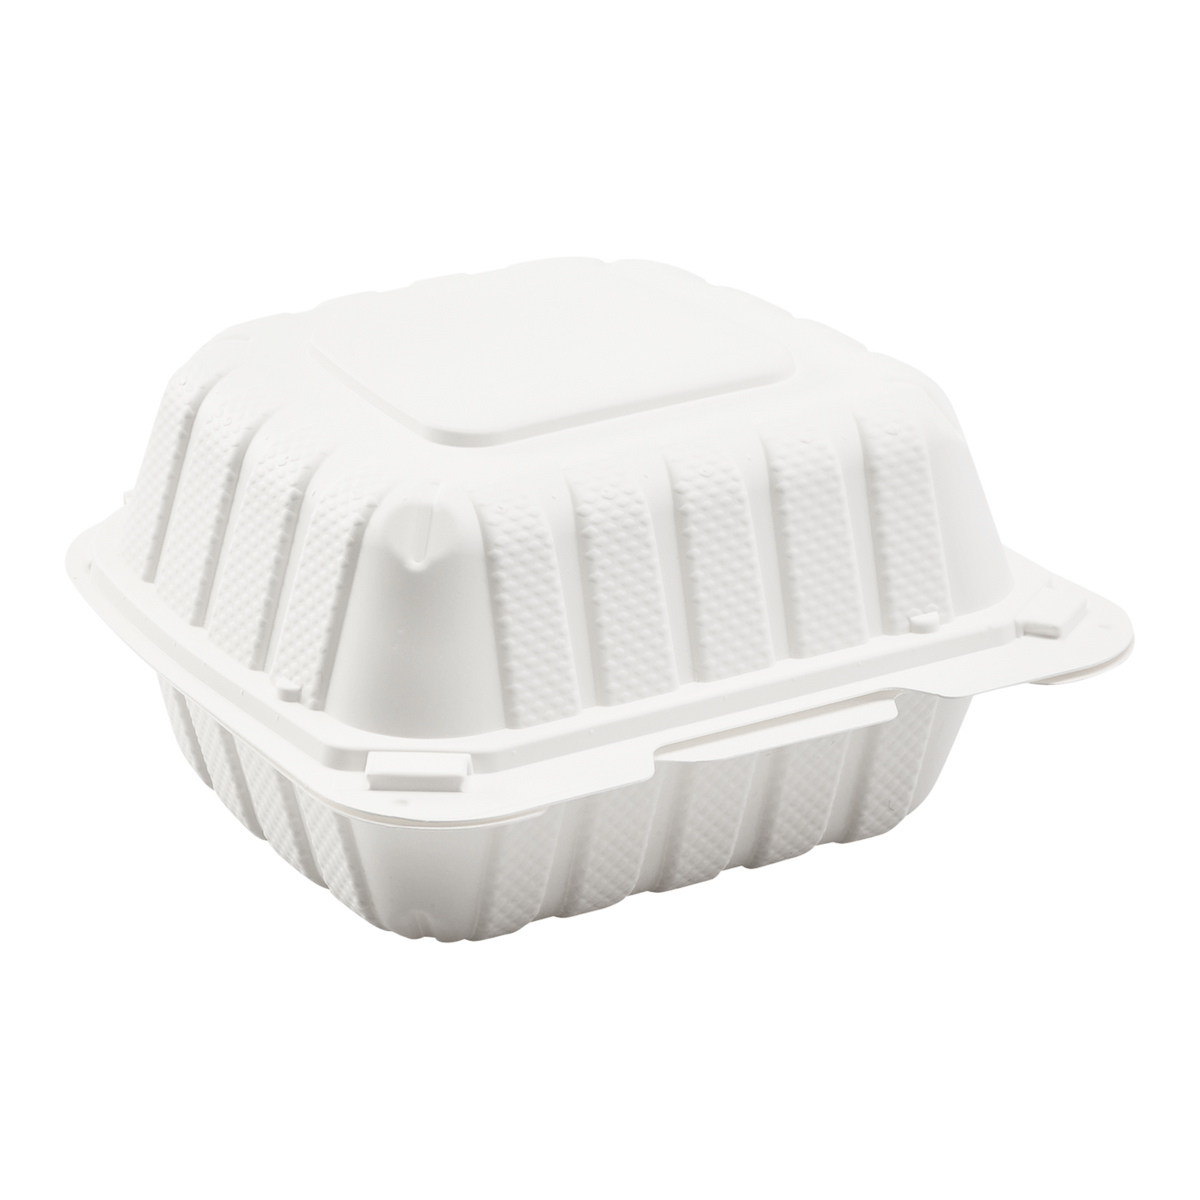 Buy Houseables Takeout Containers, to Go Box, Restaurant Take Out